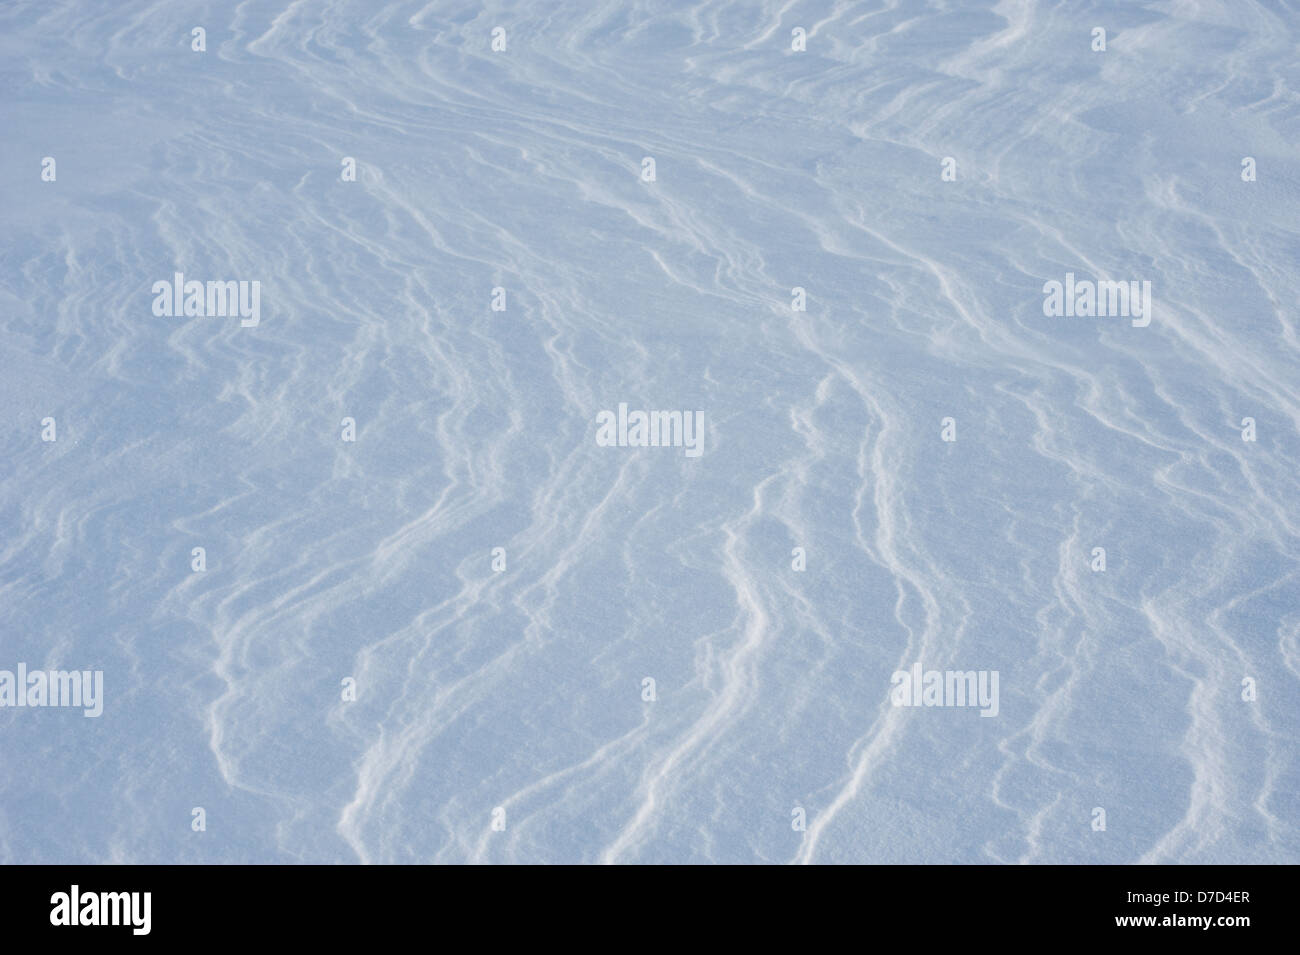 Patterns on wind-driven snow catch the sunlight on a cold winter's day. Stock Photo